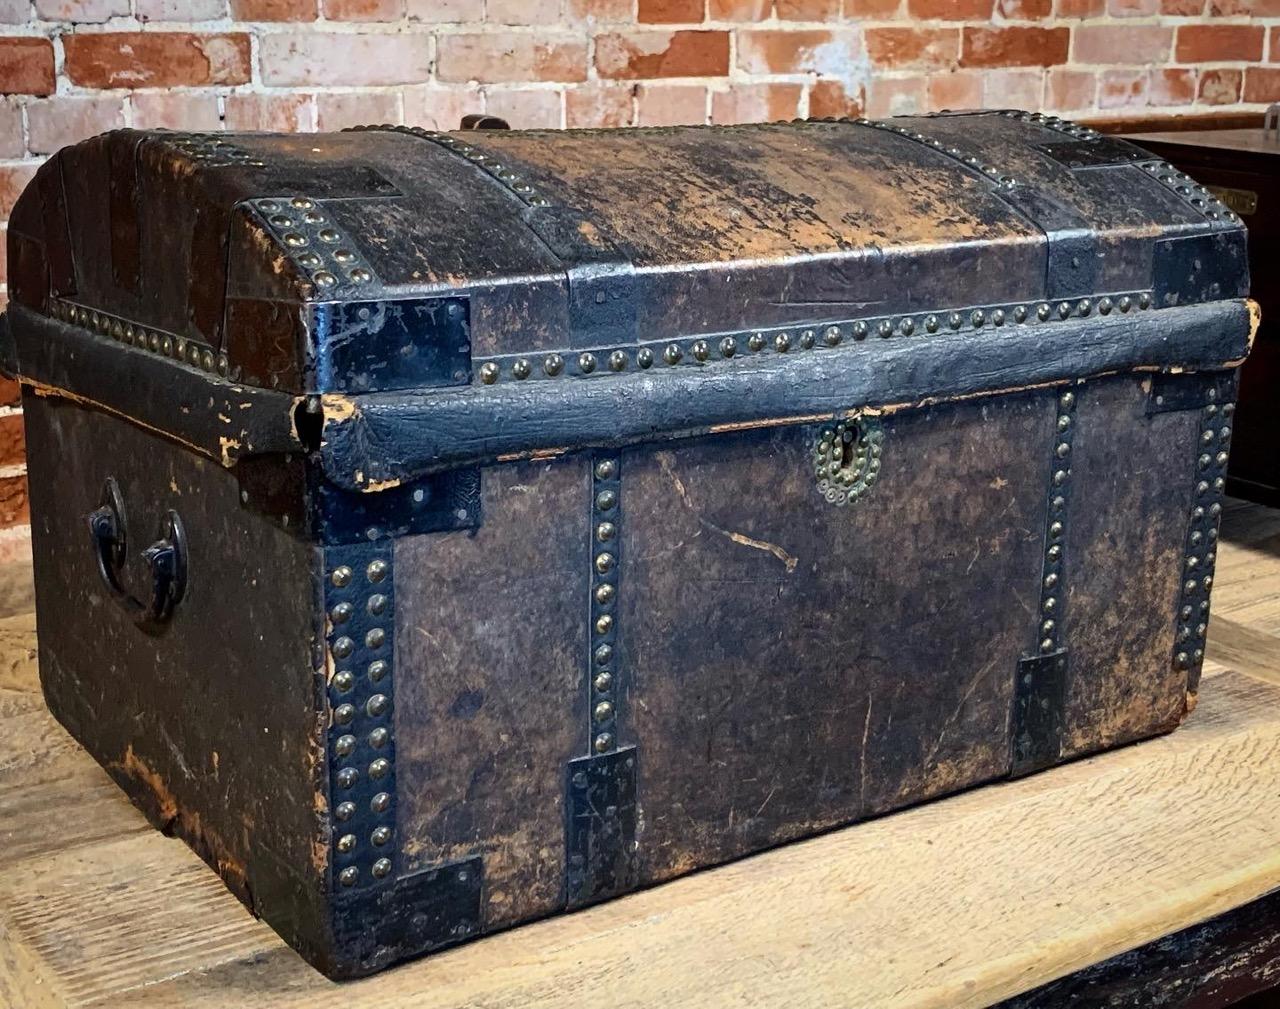 A nice 19th century leather travelling trunk with the owners initials RSM done with brass studs on the domed lid. The leather has a beautiful aged patina which gives it a good decorative look.